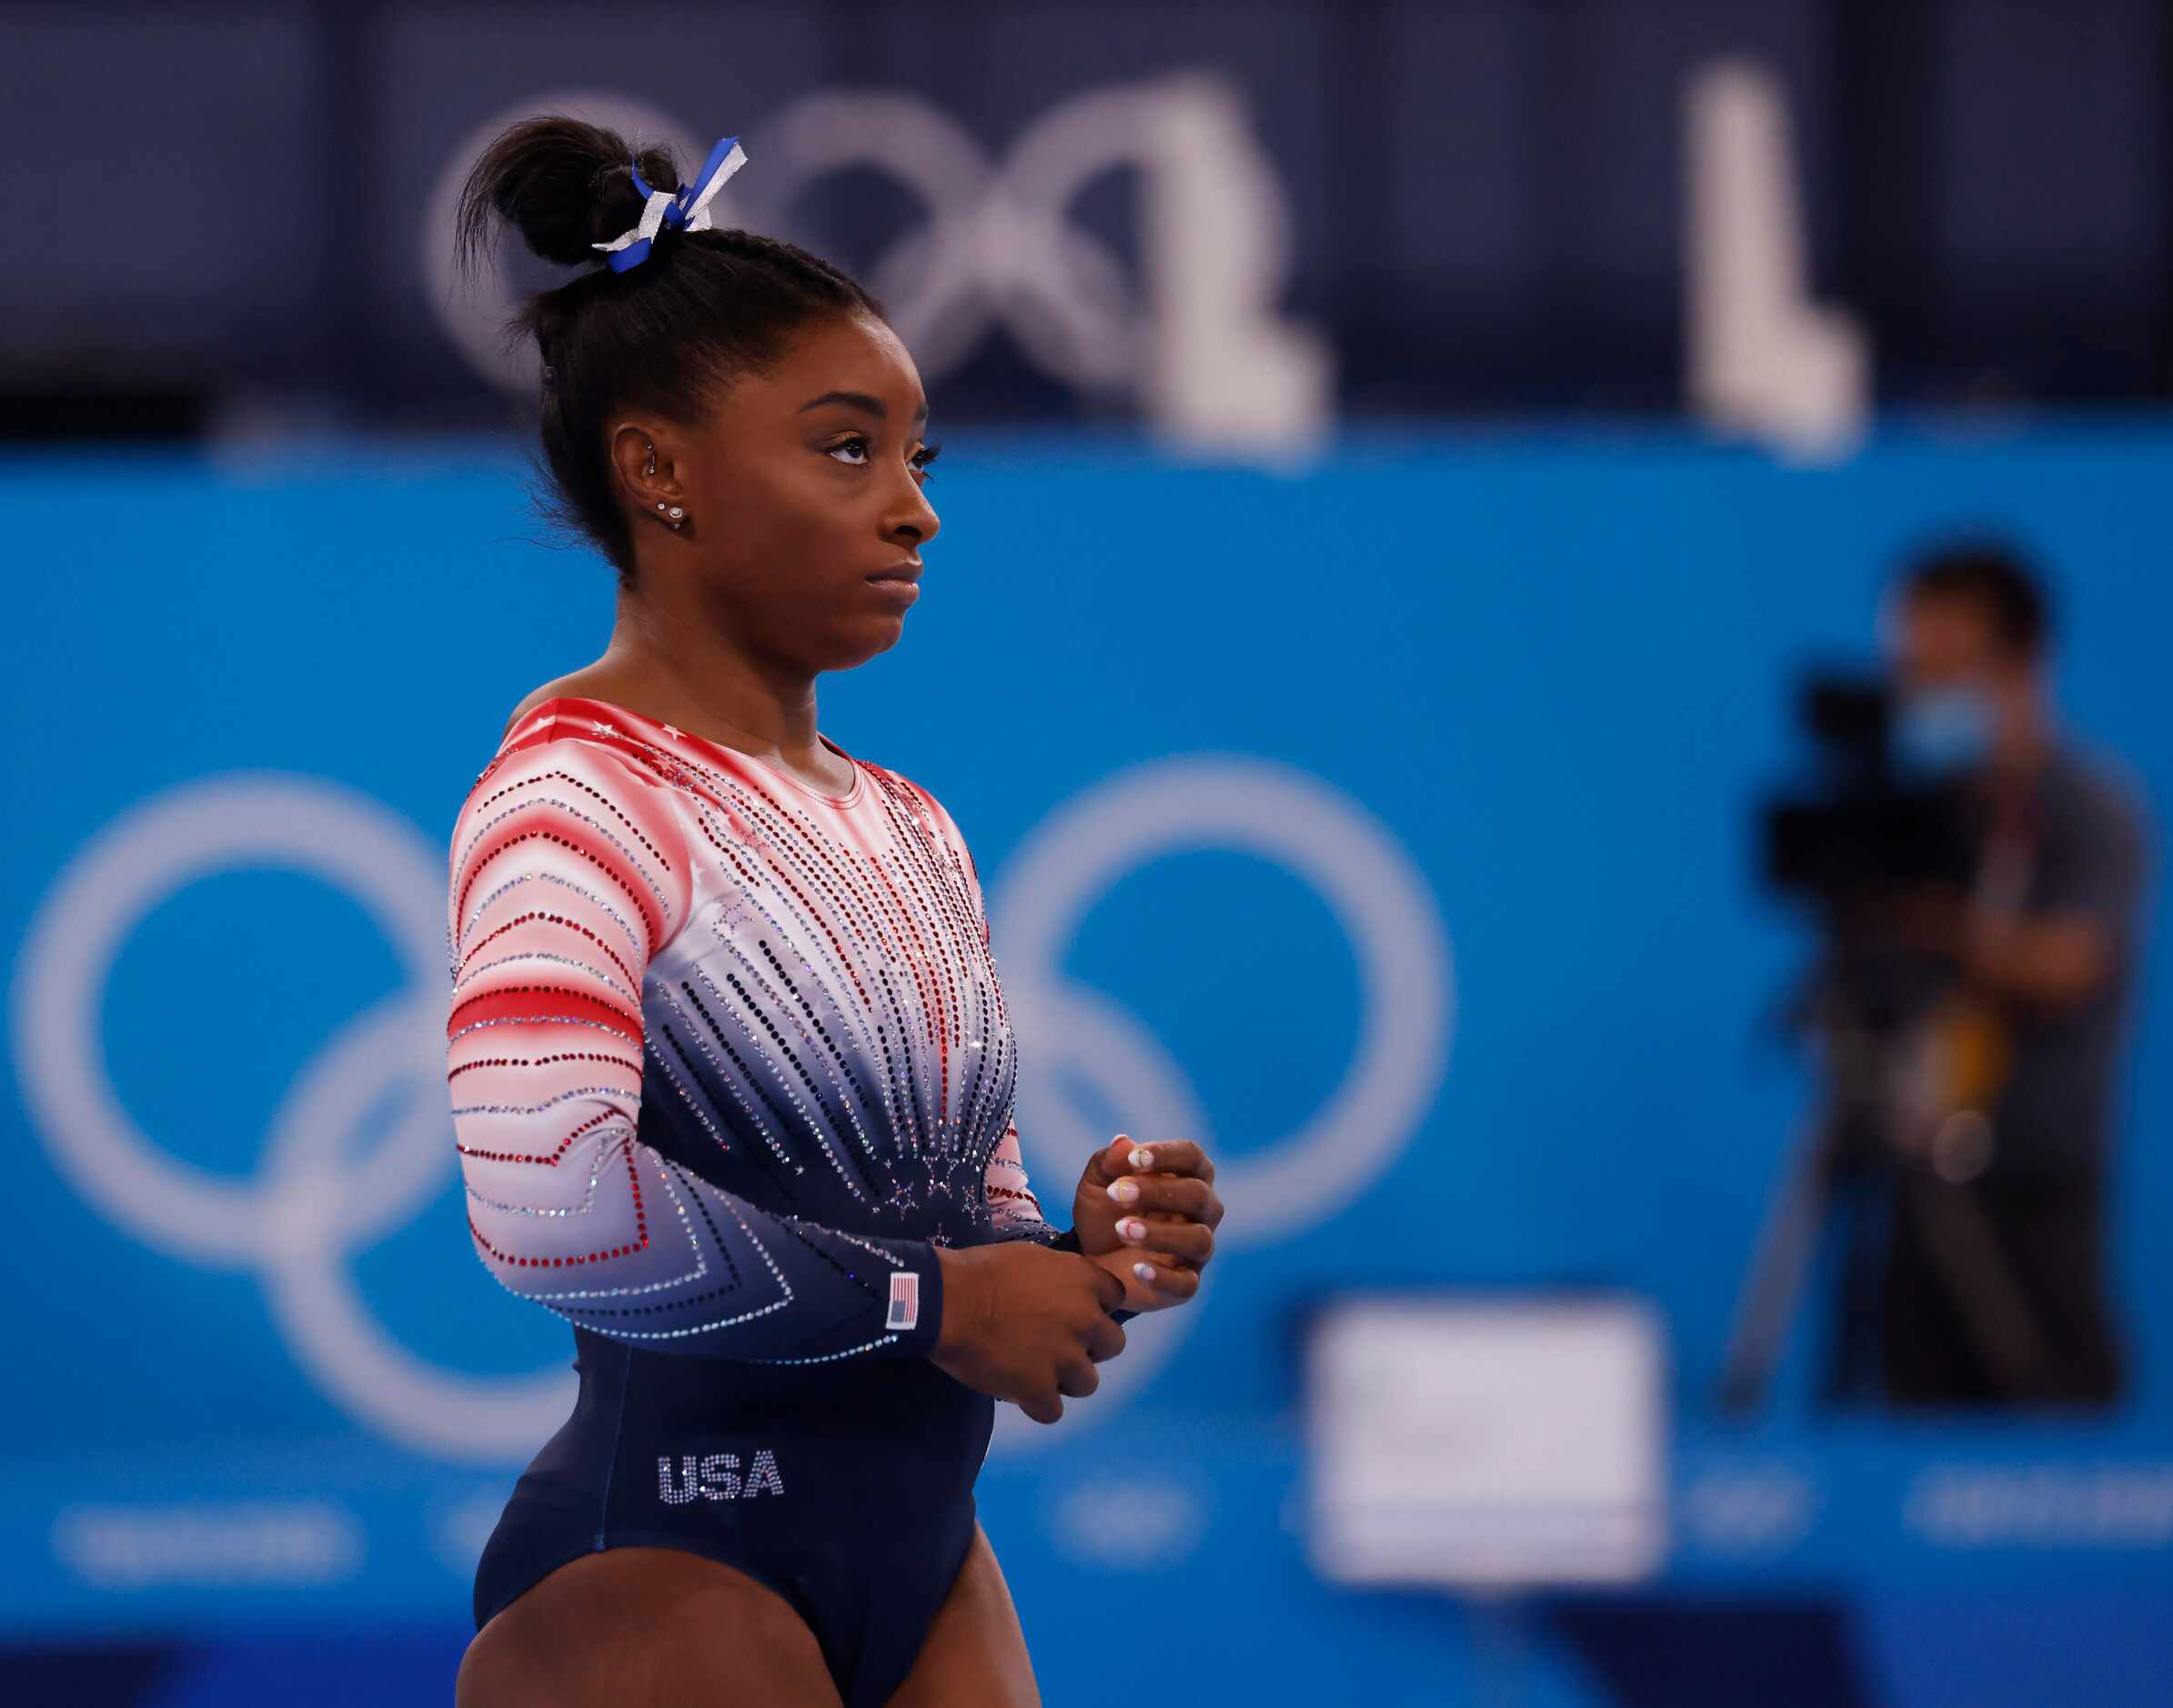 USA’s Simone Biles before competing in the women’s balance beam final at the postponed 2020...